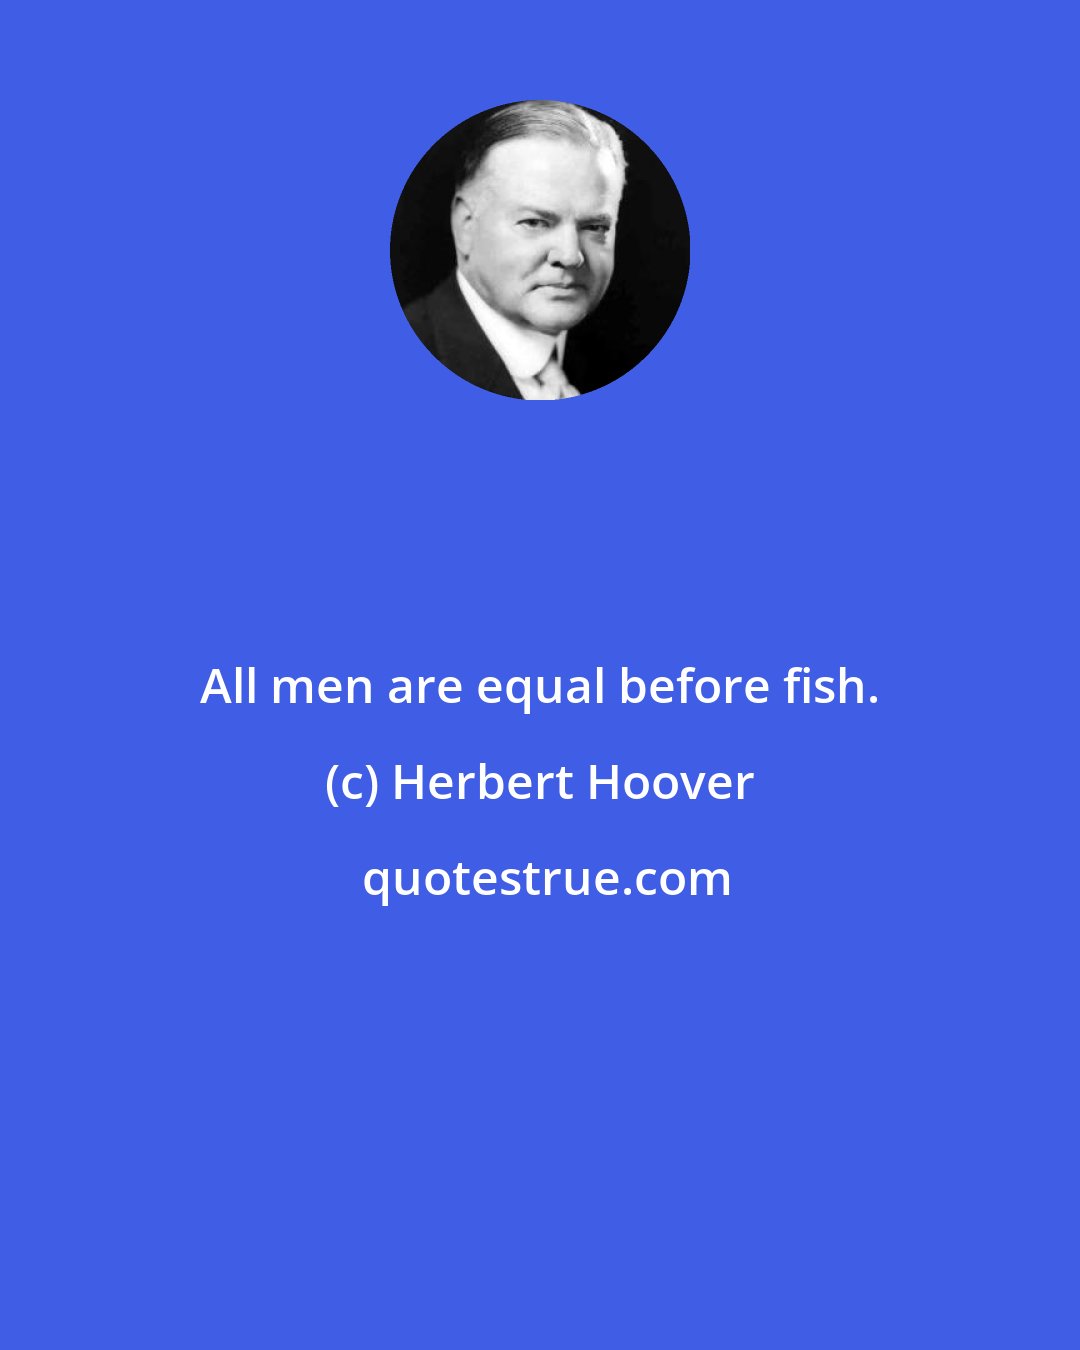 Herbert Hoover: All men are equal before fish.